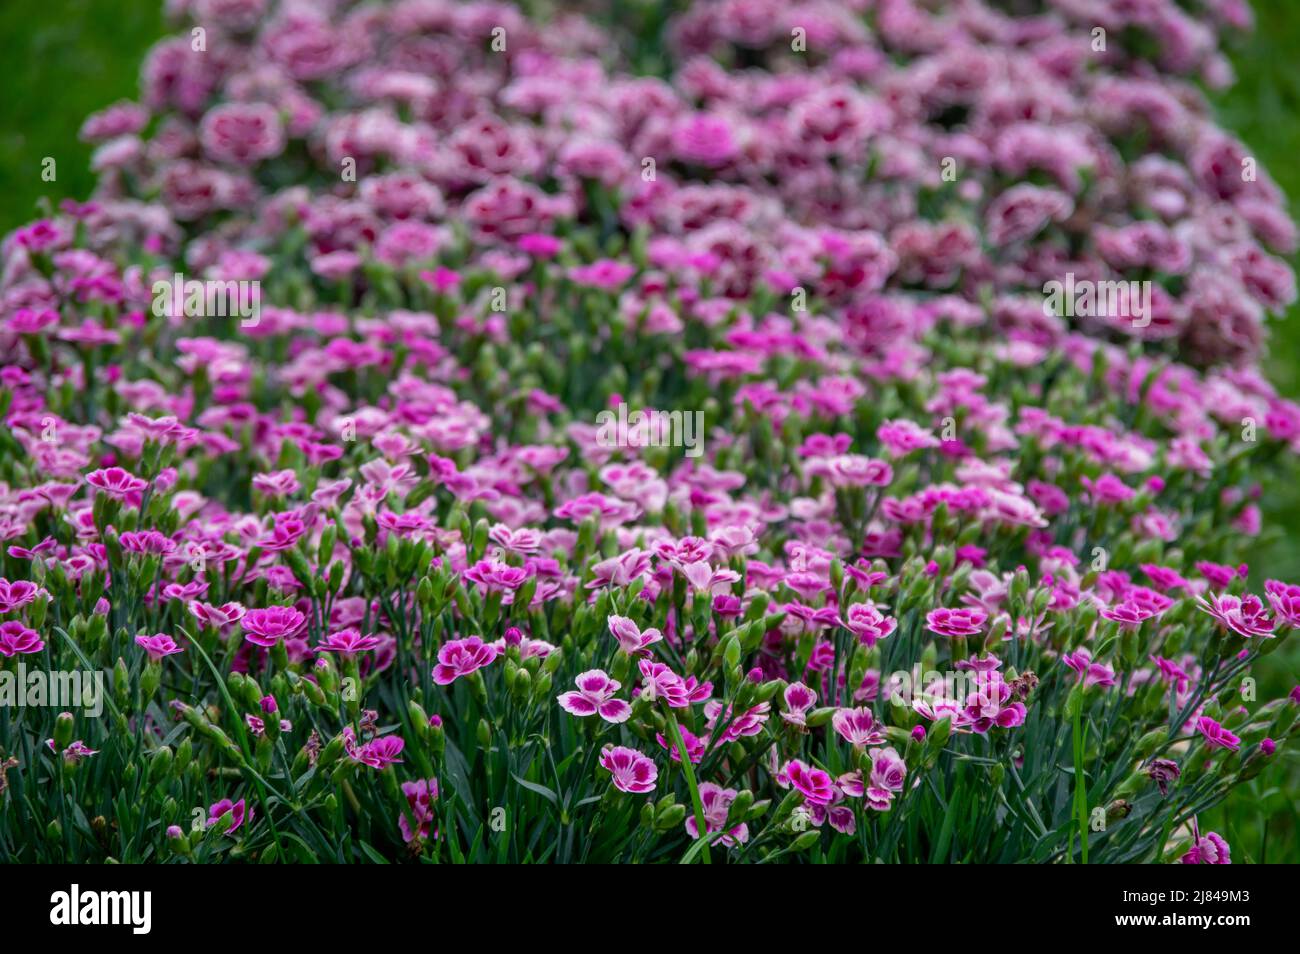 Lots of clove pink carnation flowers blossoming with green grass in the background Stock Photo